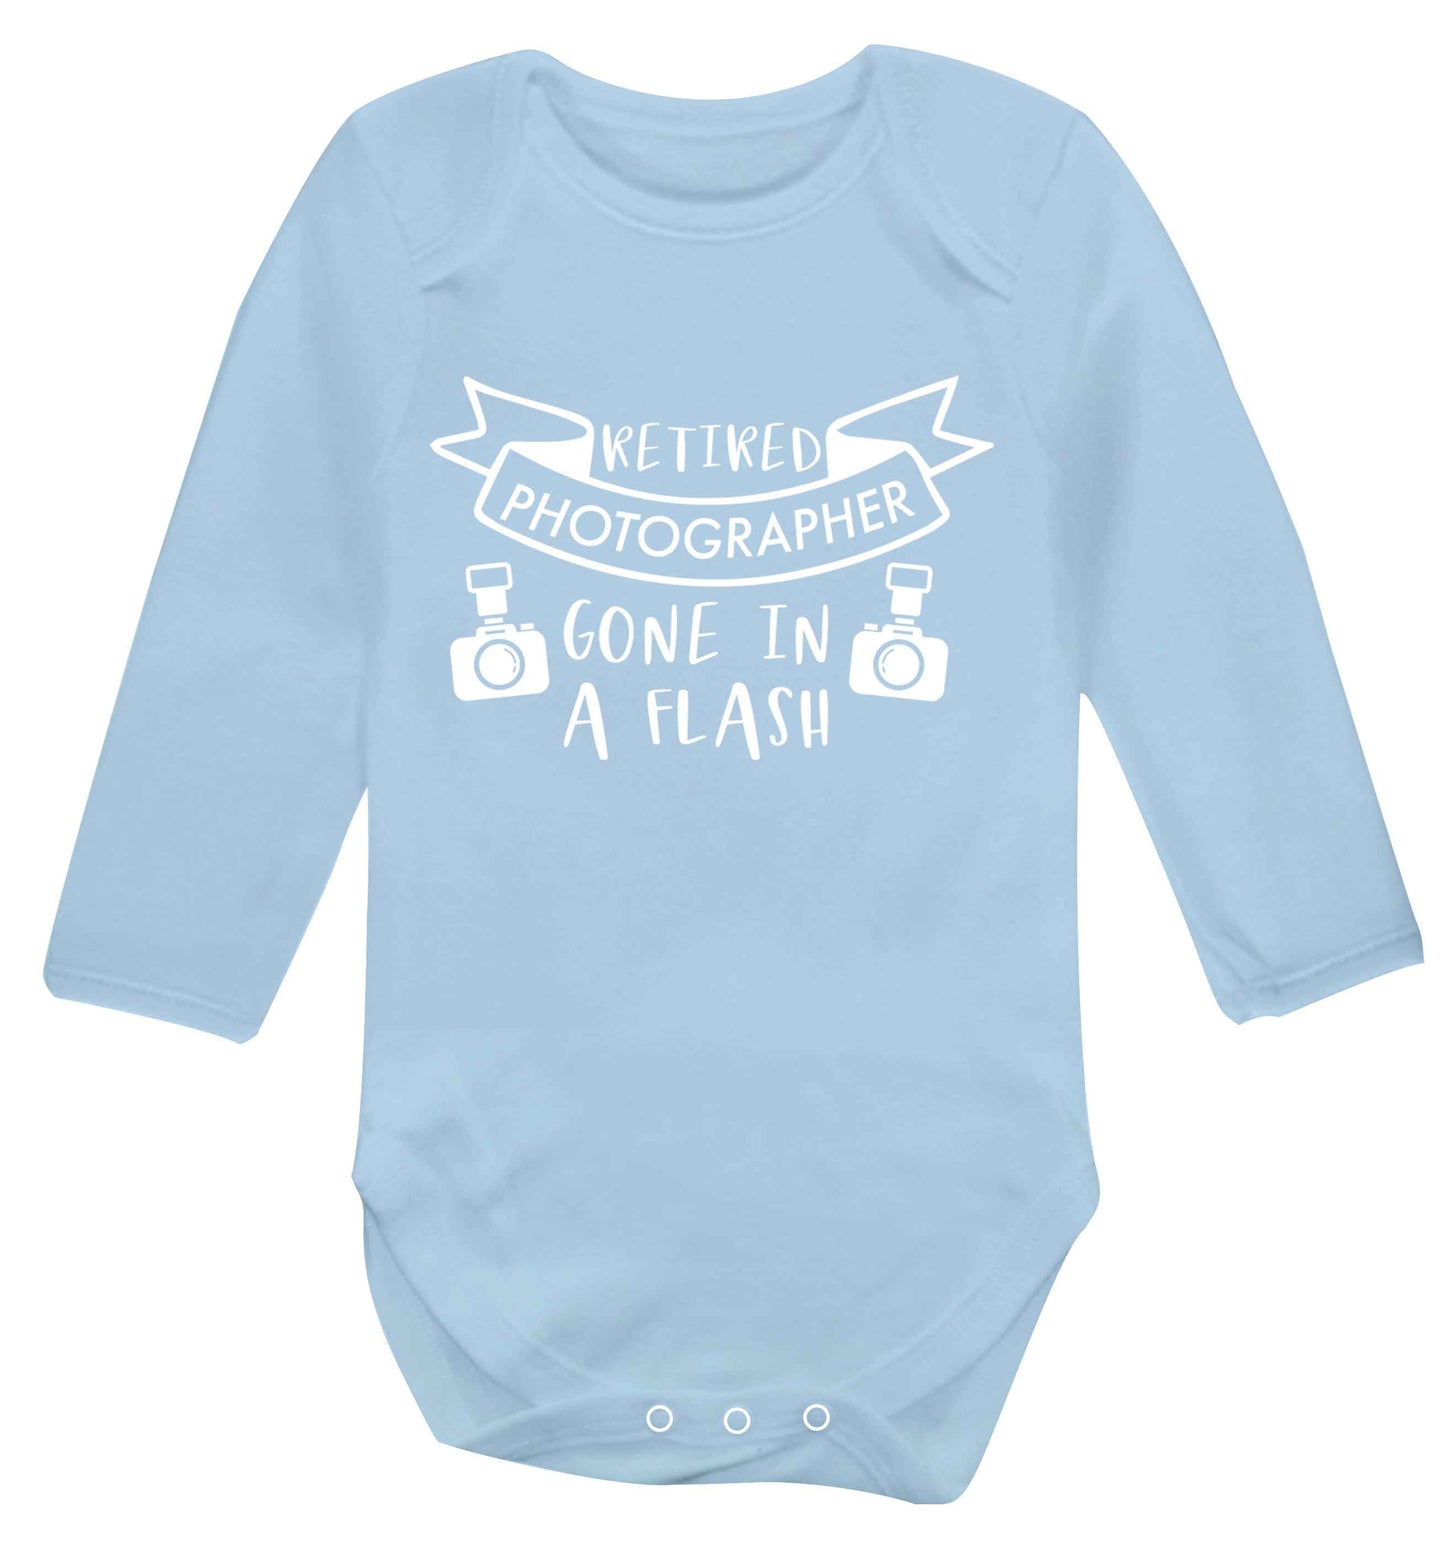 Retired photographer gone in a flash Baby Vest long sleeved pale blue 6-12 months